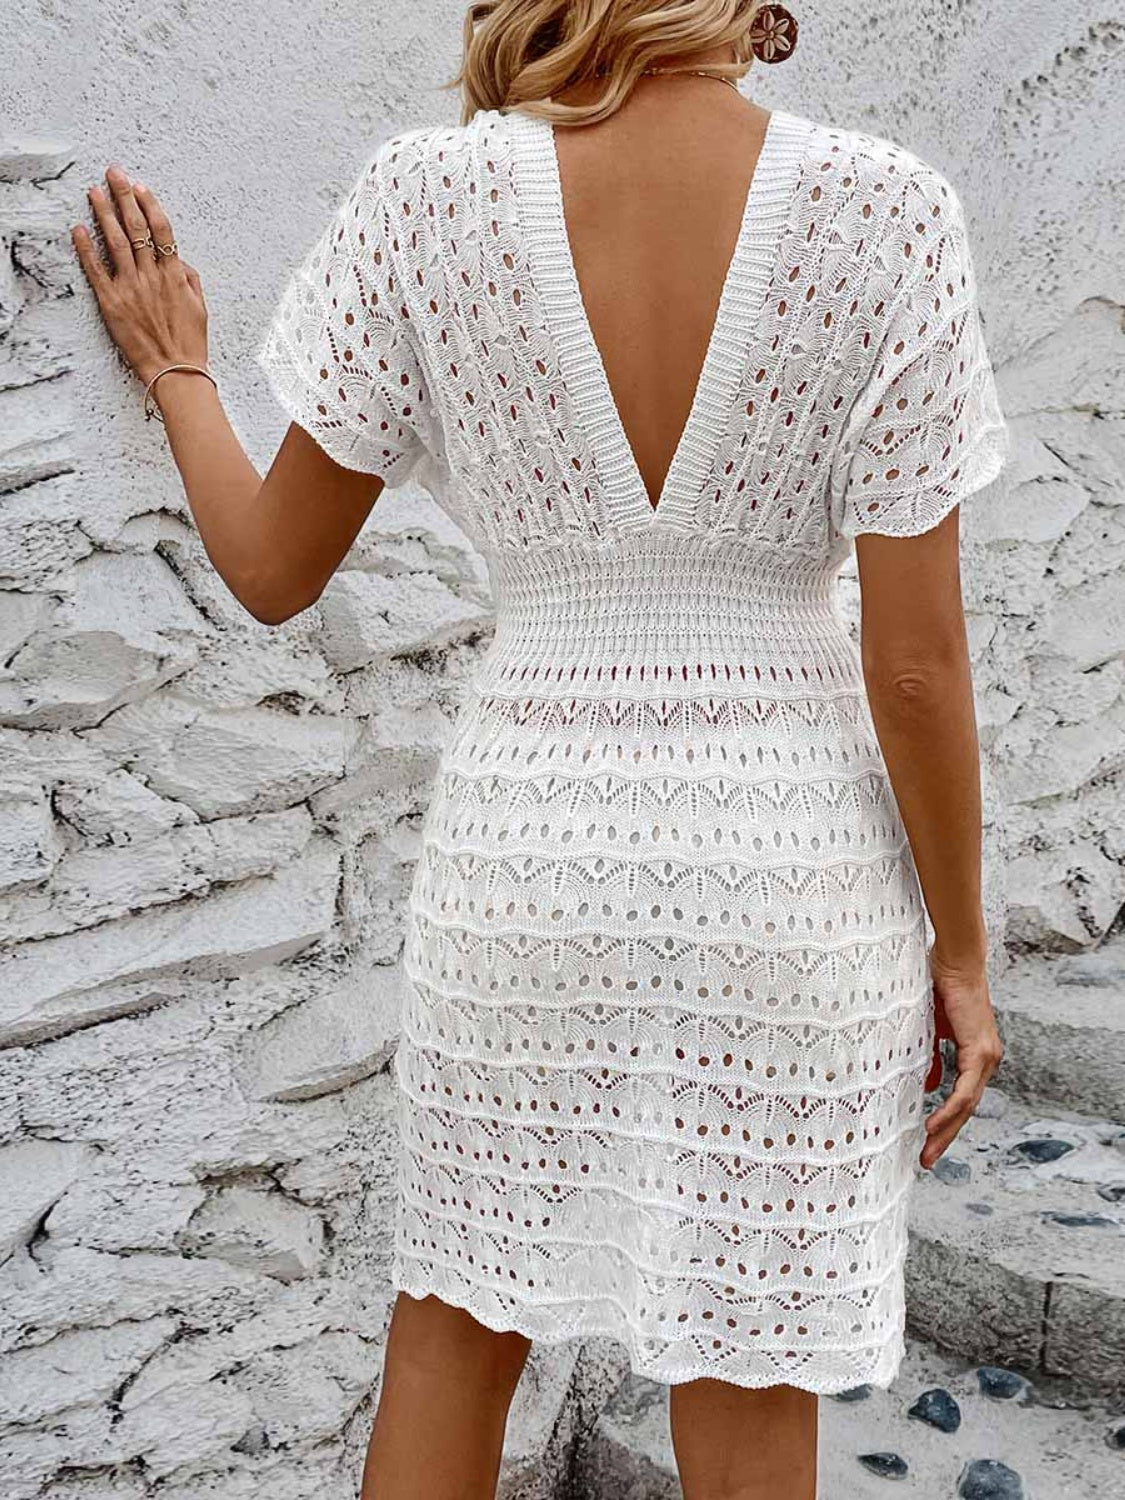 Sunset Vacation  Openwork Plunge Short Sleeve Cover-Up Dress  Sunset and Swim   